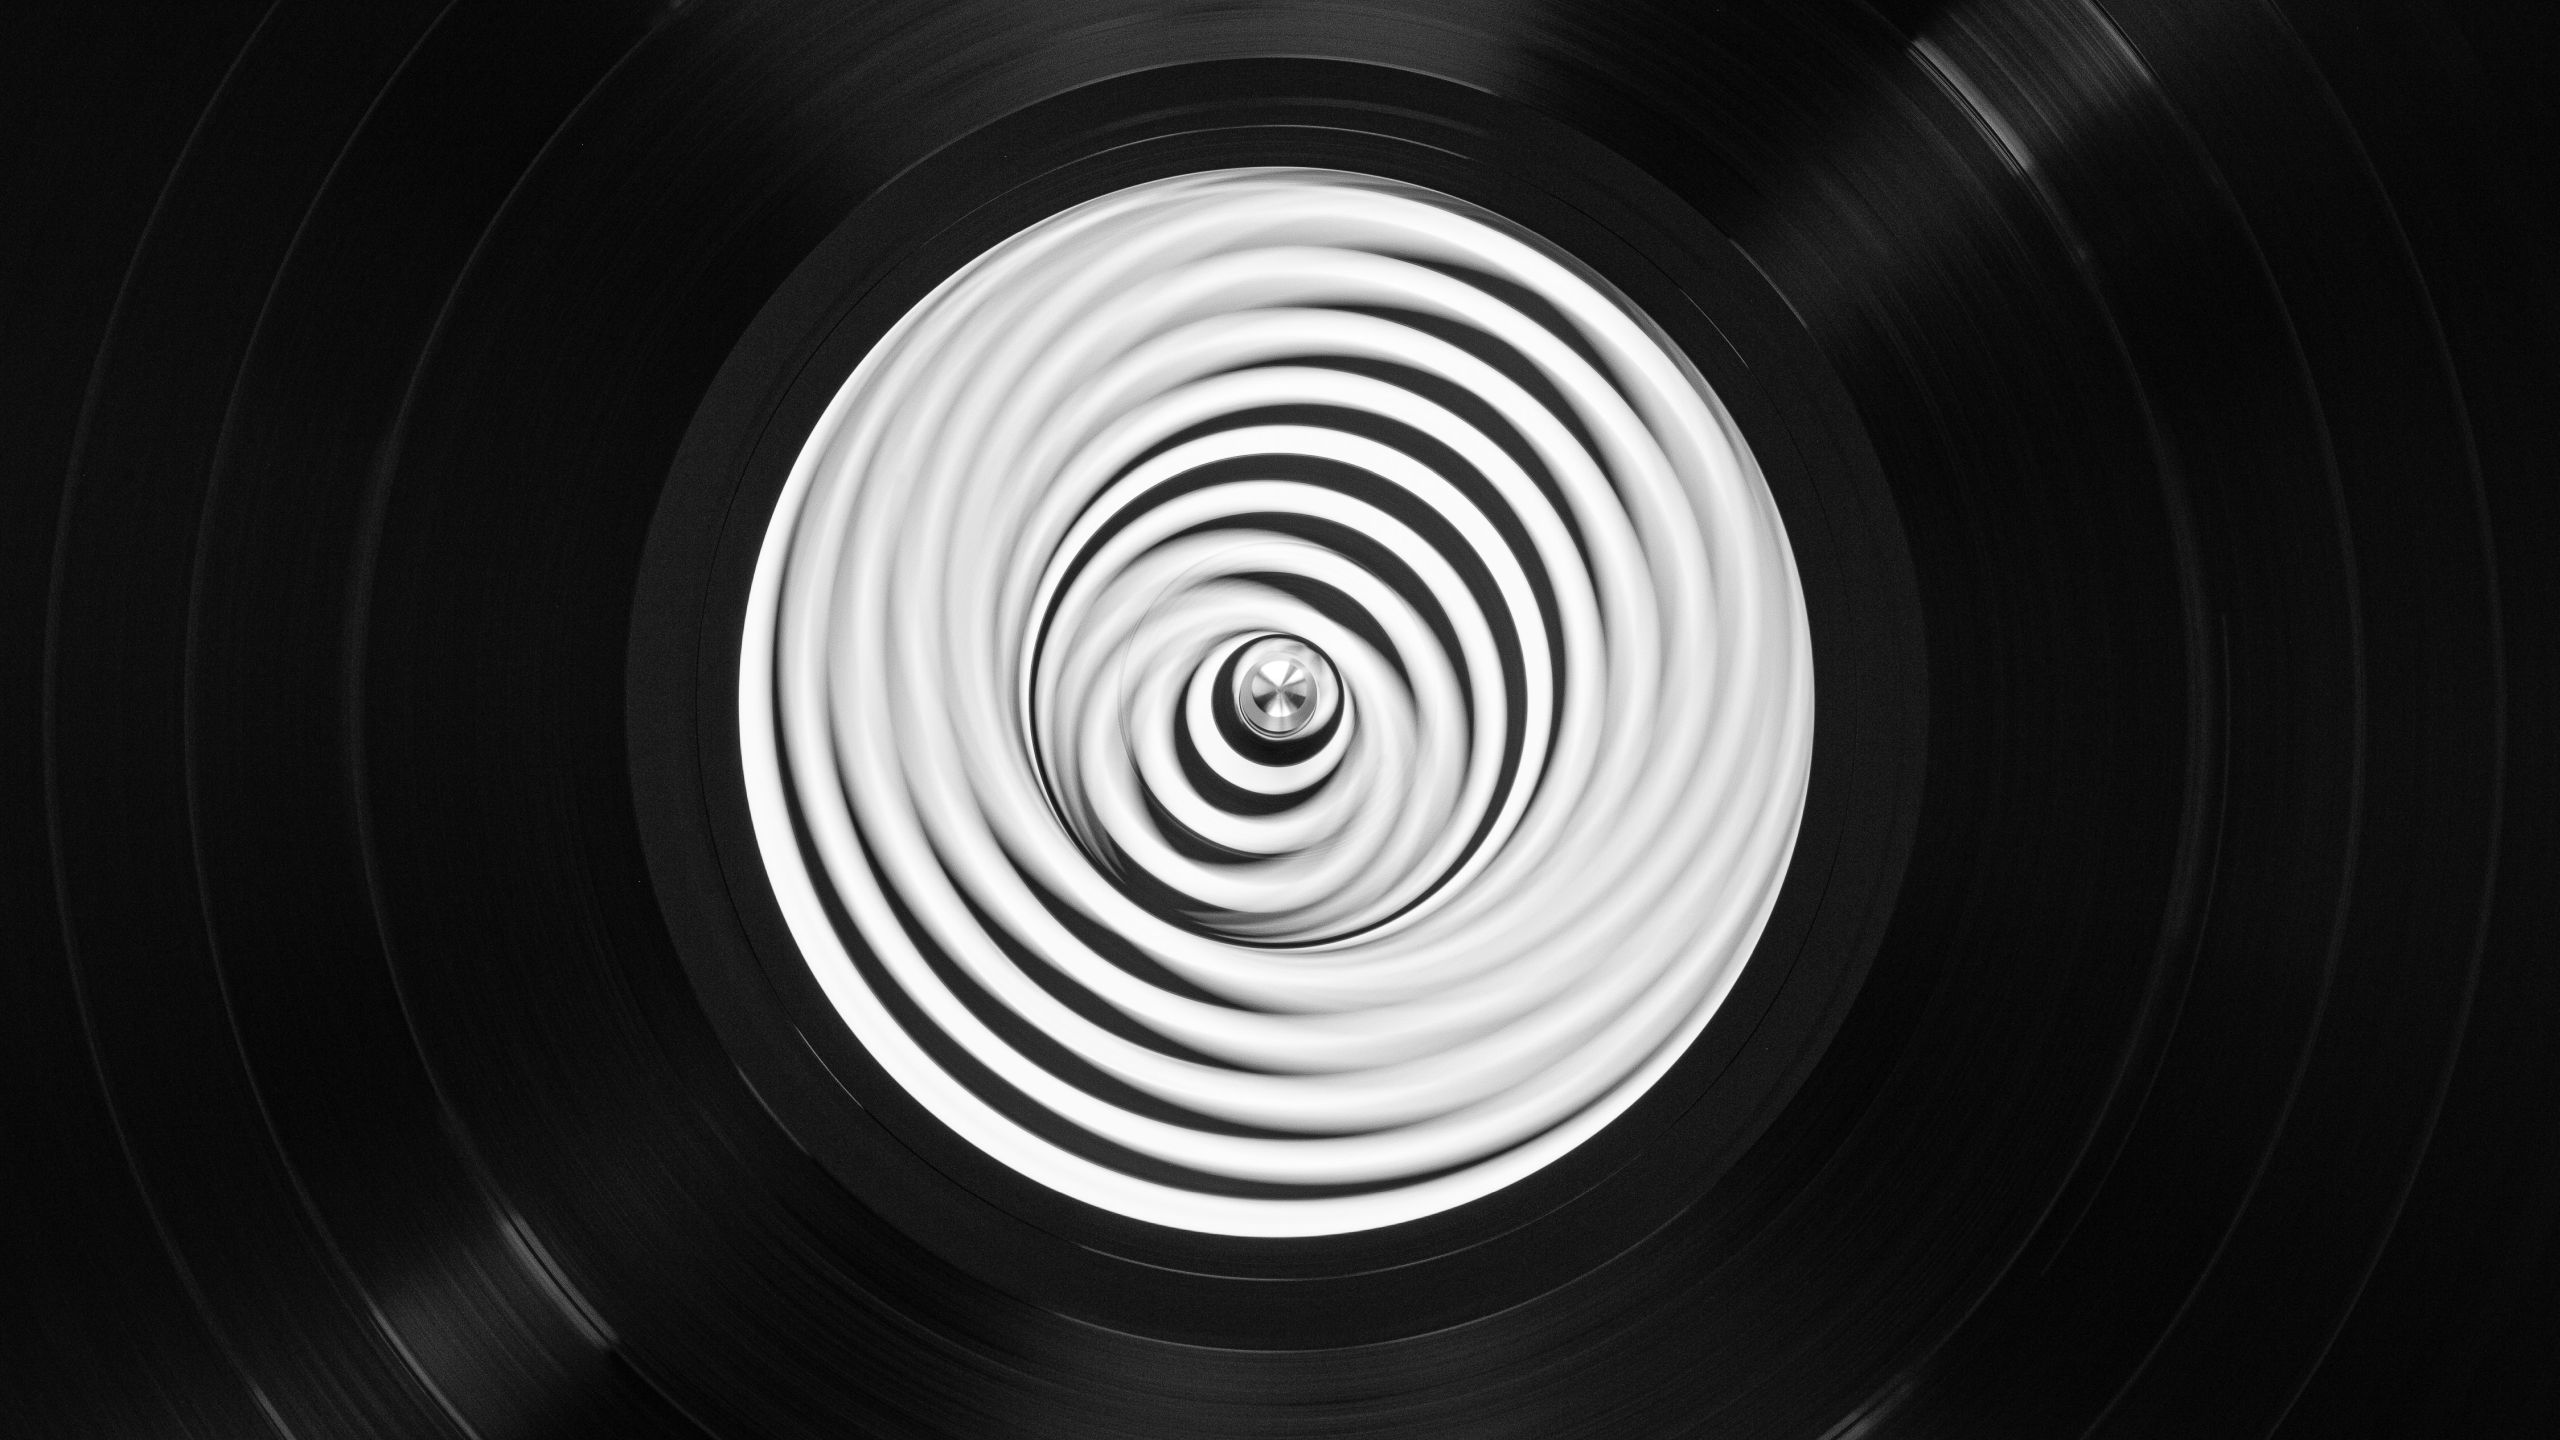 A spinning record with vertigo-inducing rings in its center.